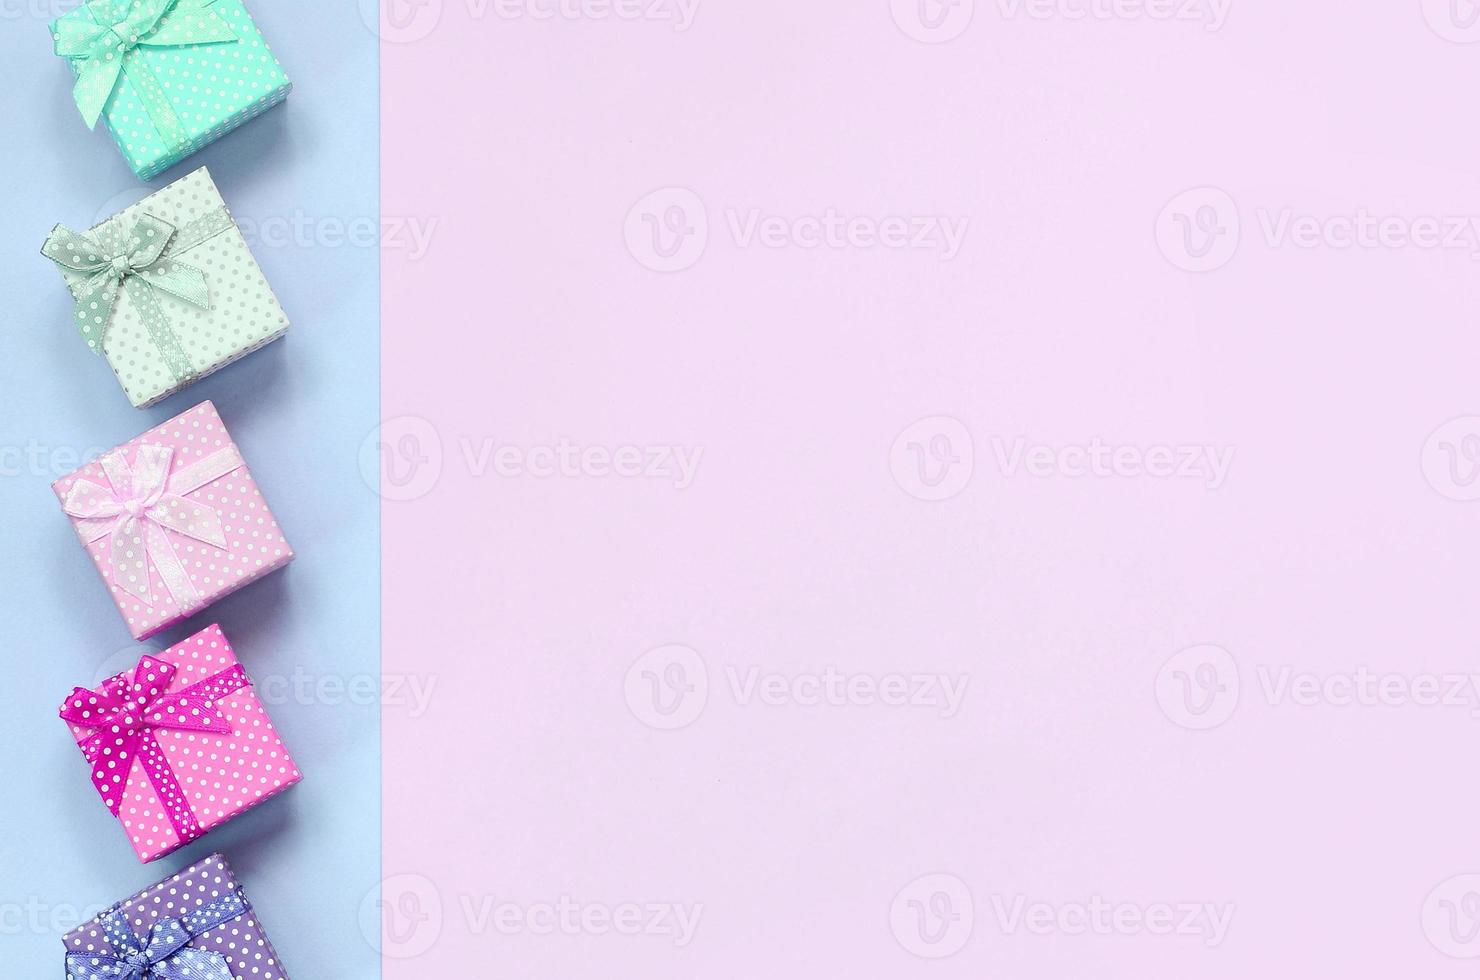 Small gift boxes of different colors with ribbons lies on a violet and pink background photo